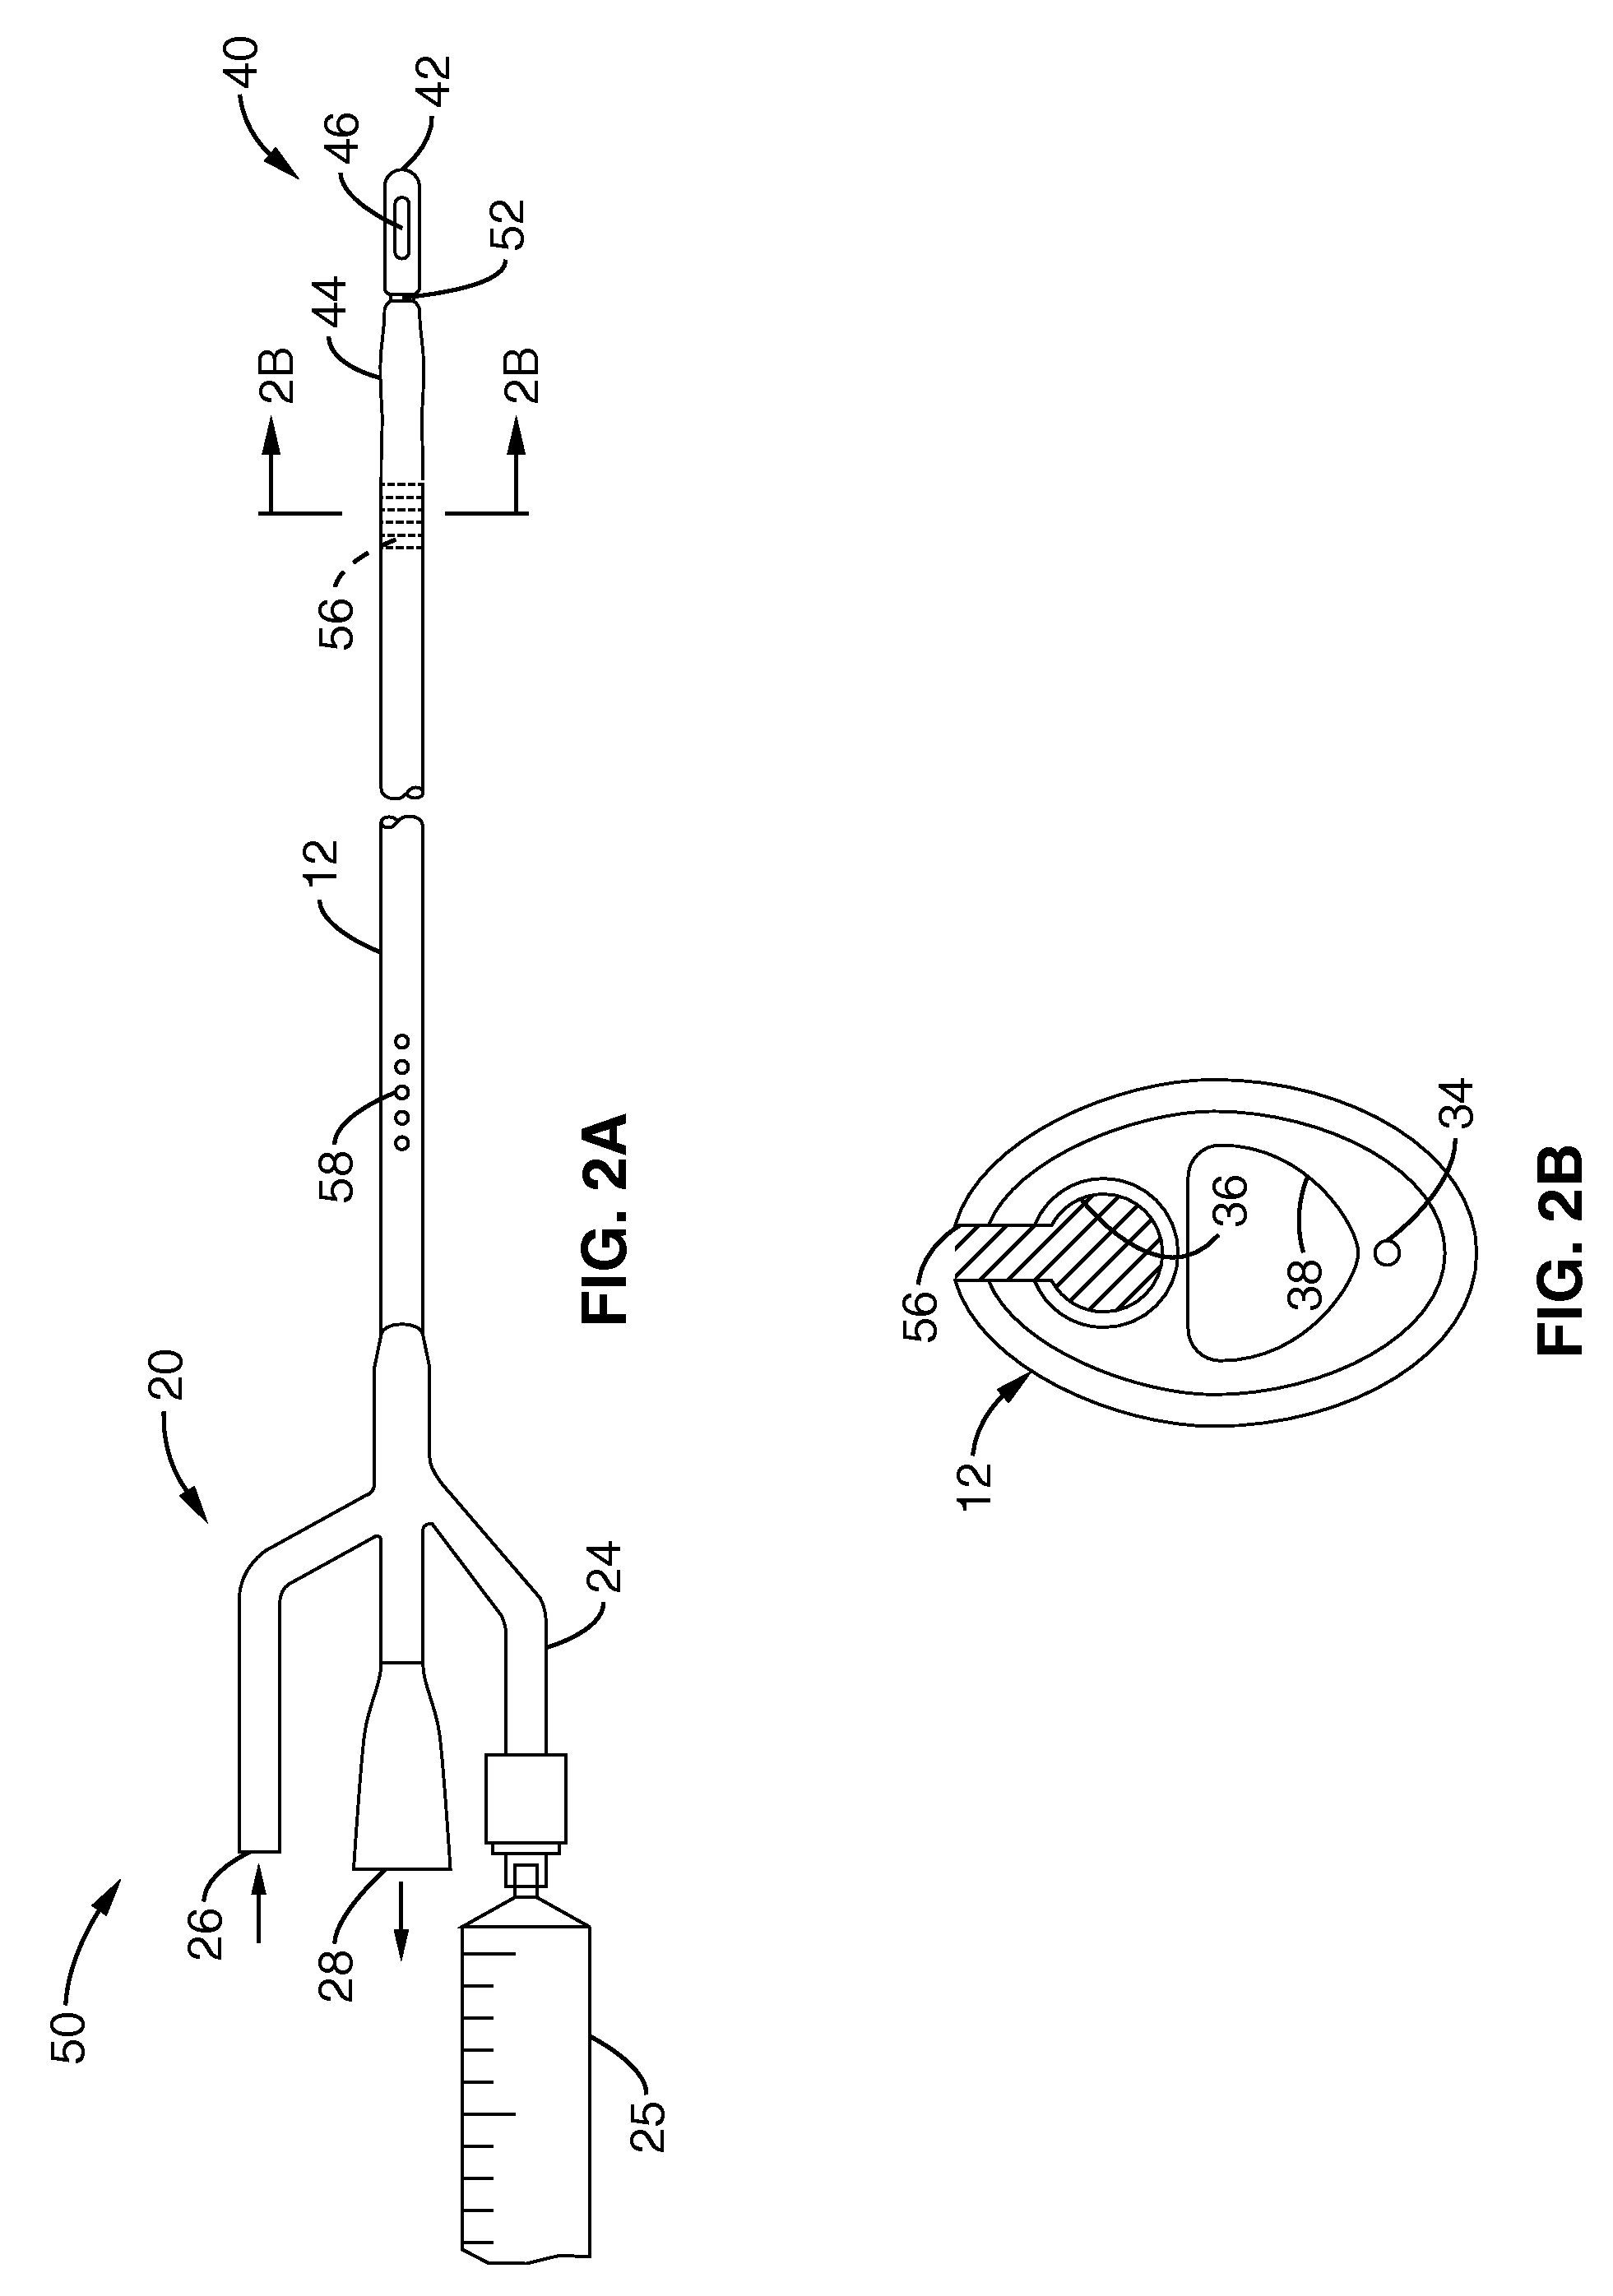 System and method for urinary tract cell collection, diagnosis, and chemotherapy